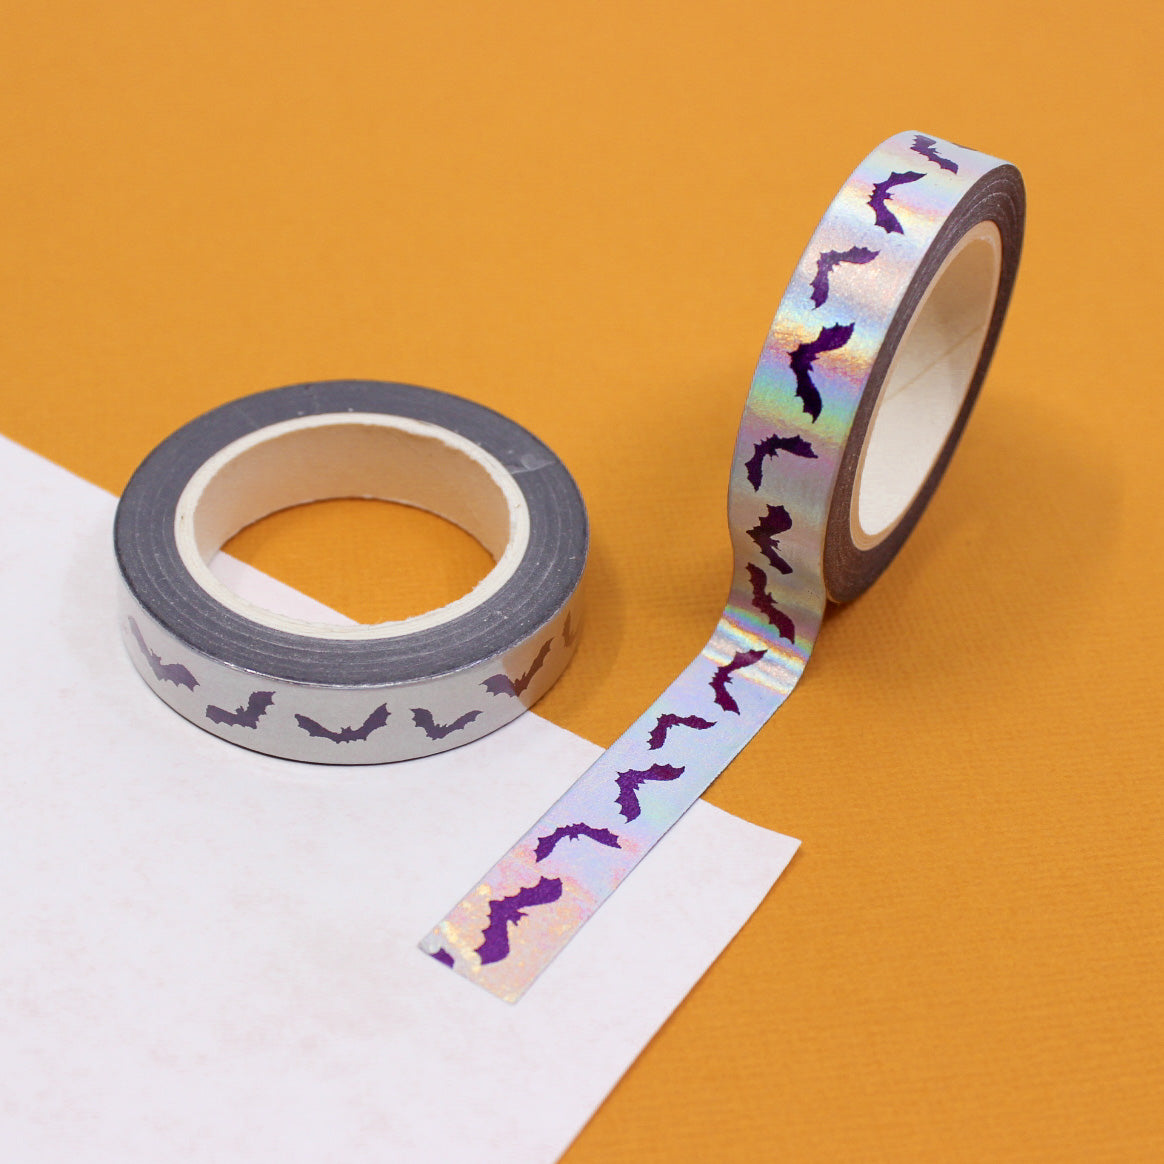 Get in the Halloween spirit with our Silver Foil Spooky Bats Washi Tape, featuring a haunting pattern of bats in shimmering silver foil. Ideal for adding a spooky and stylish touch to your projects. This tape is sold at BBB Supplies Craft Shop.